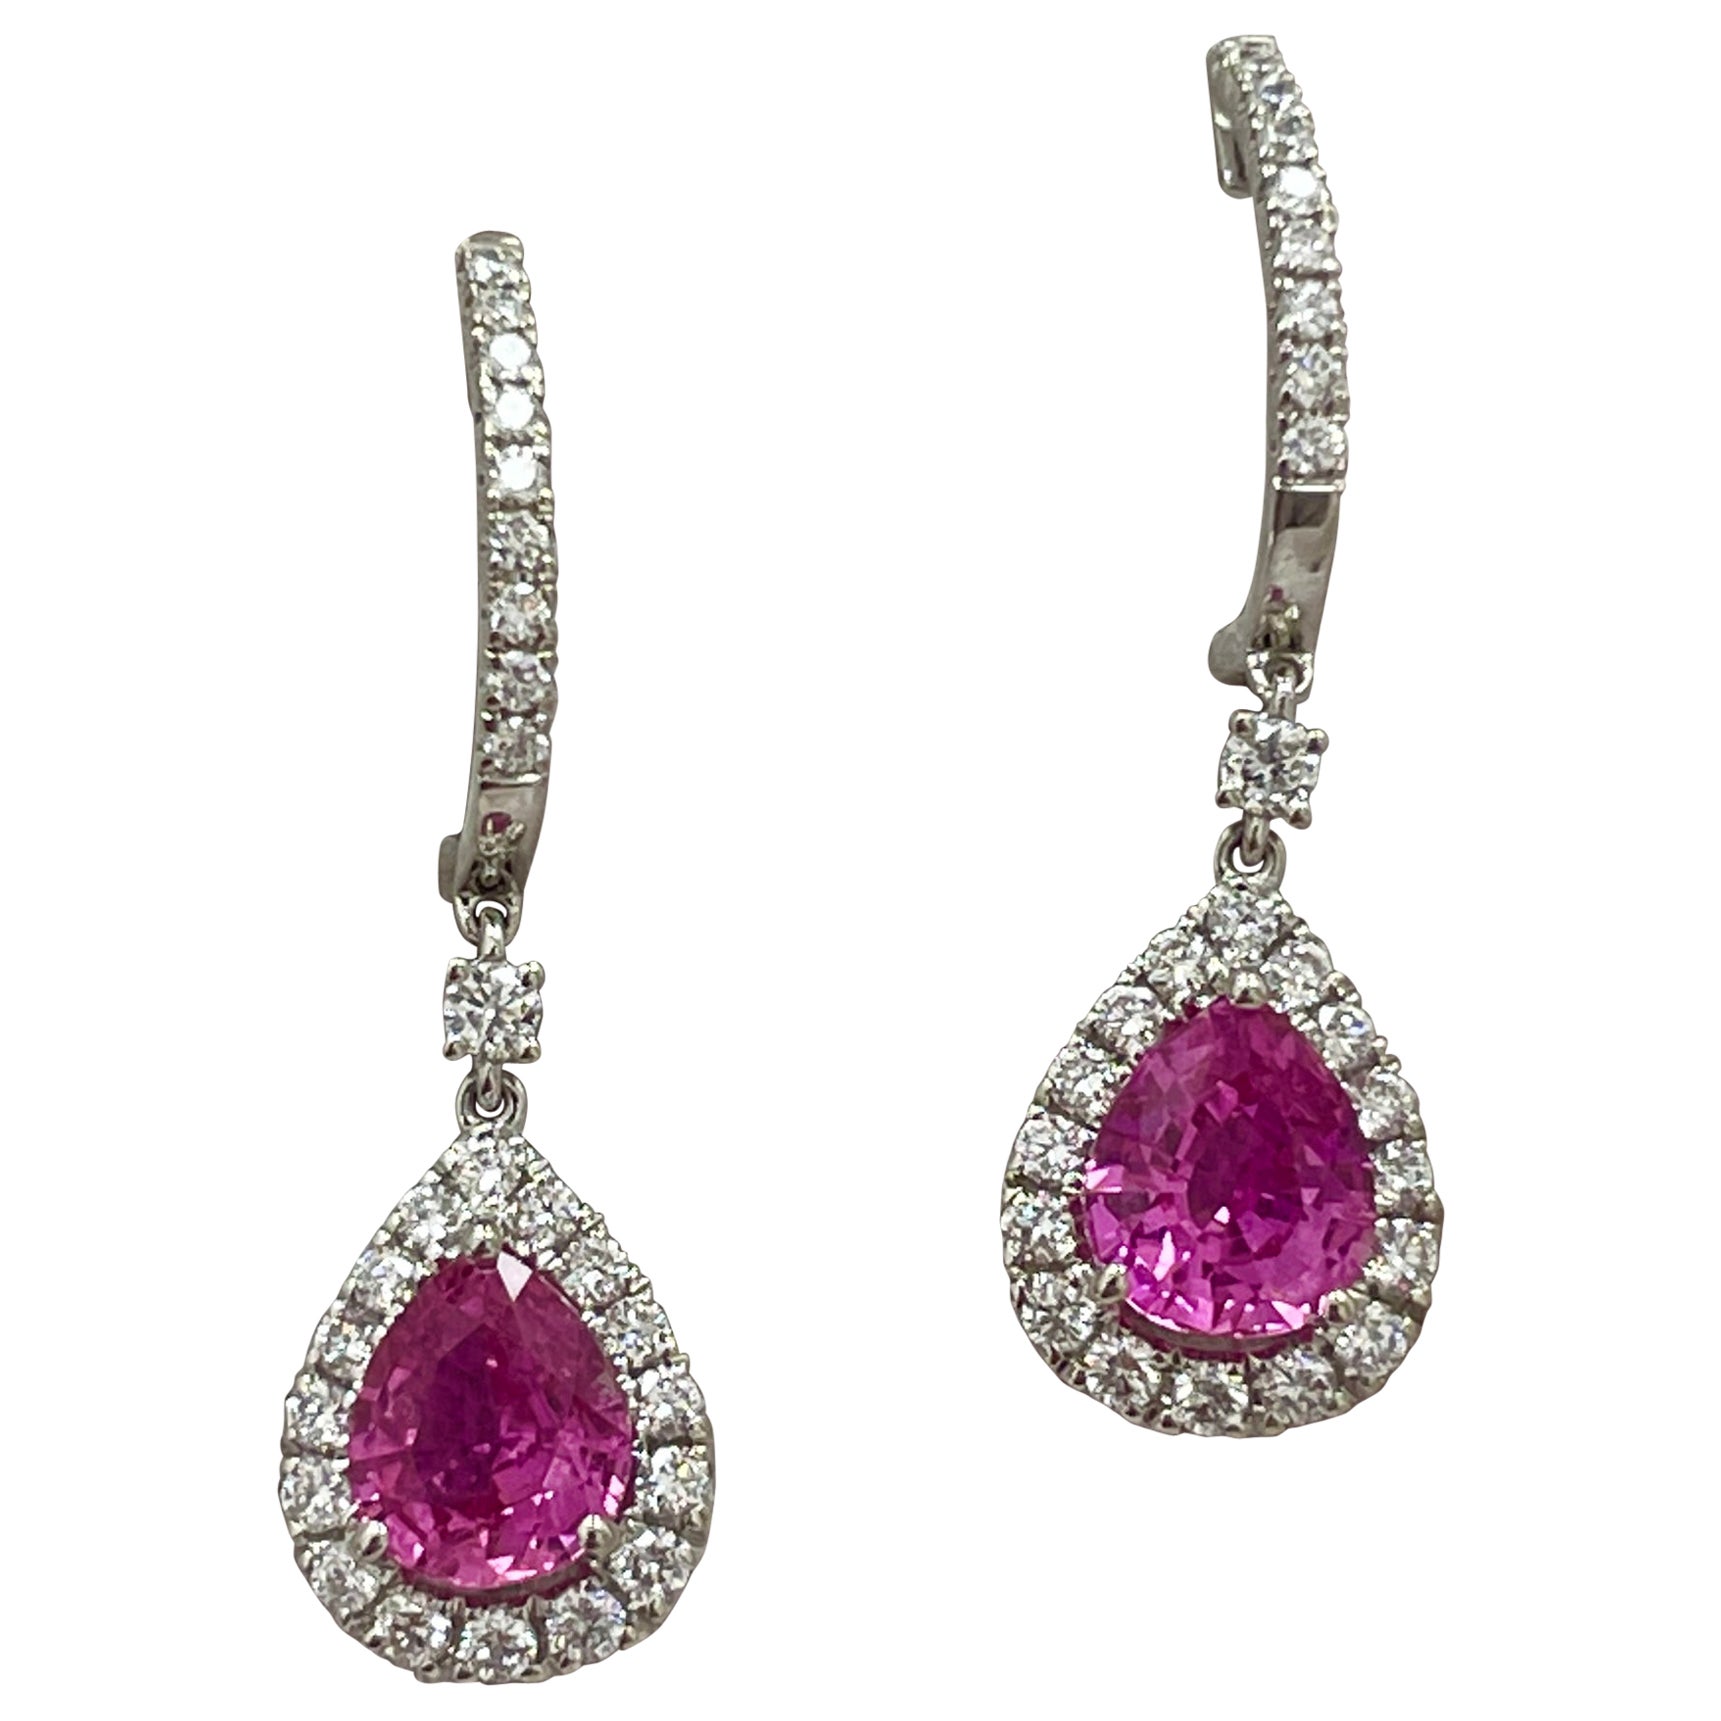 3.09 Carat Pink Sapphire, Diamond & White Gold Earrings For Sale